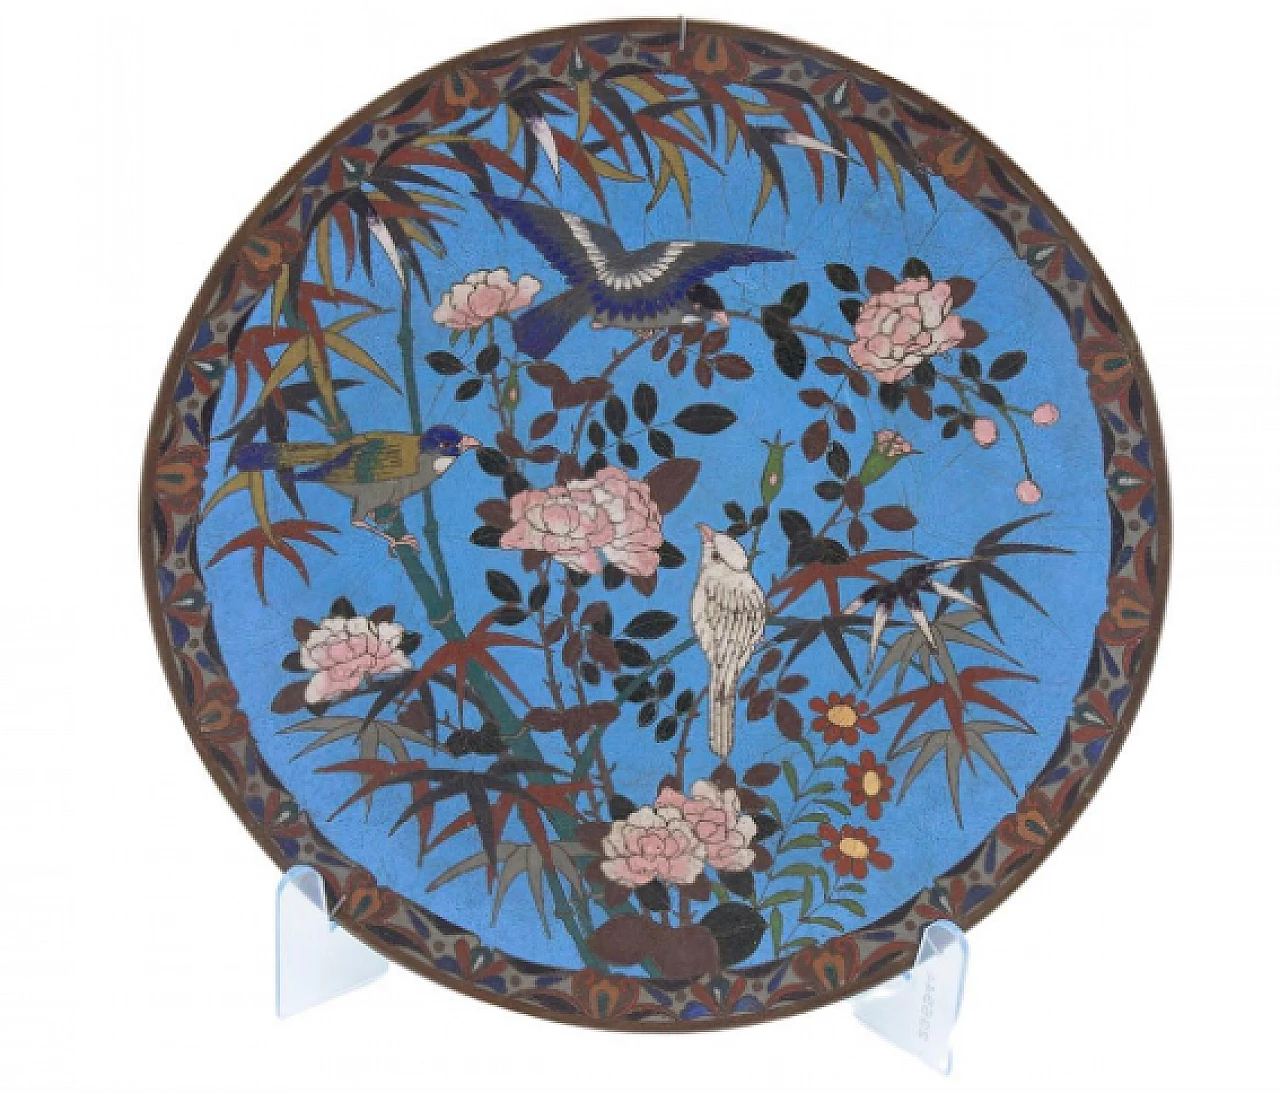 Chinese cloisonné enamel and bronze decorative plate with flowers and birds 1